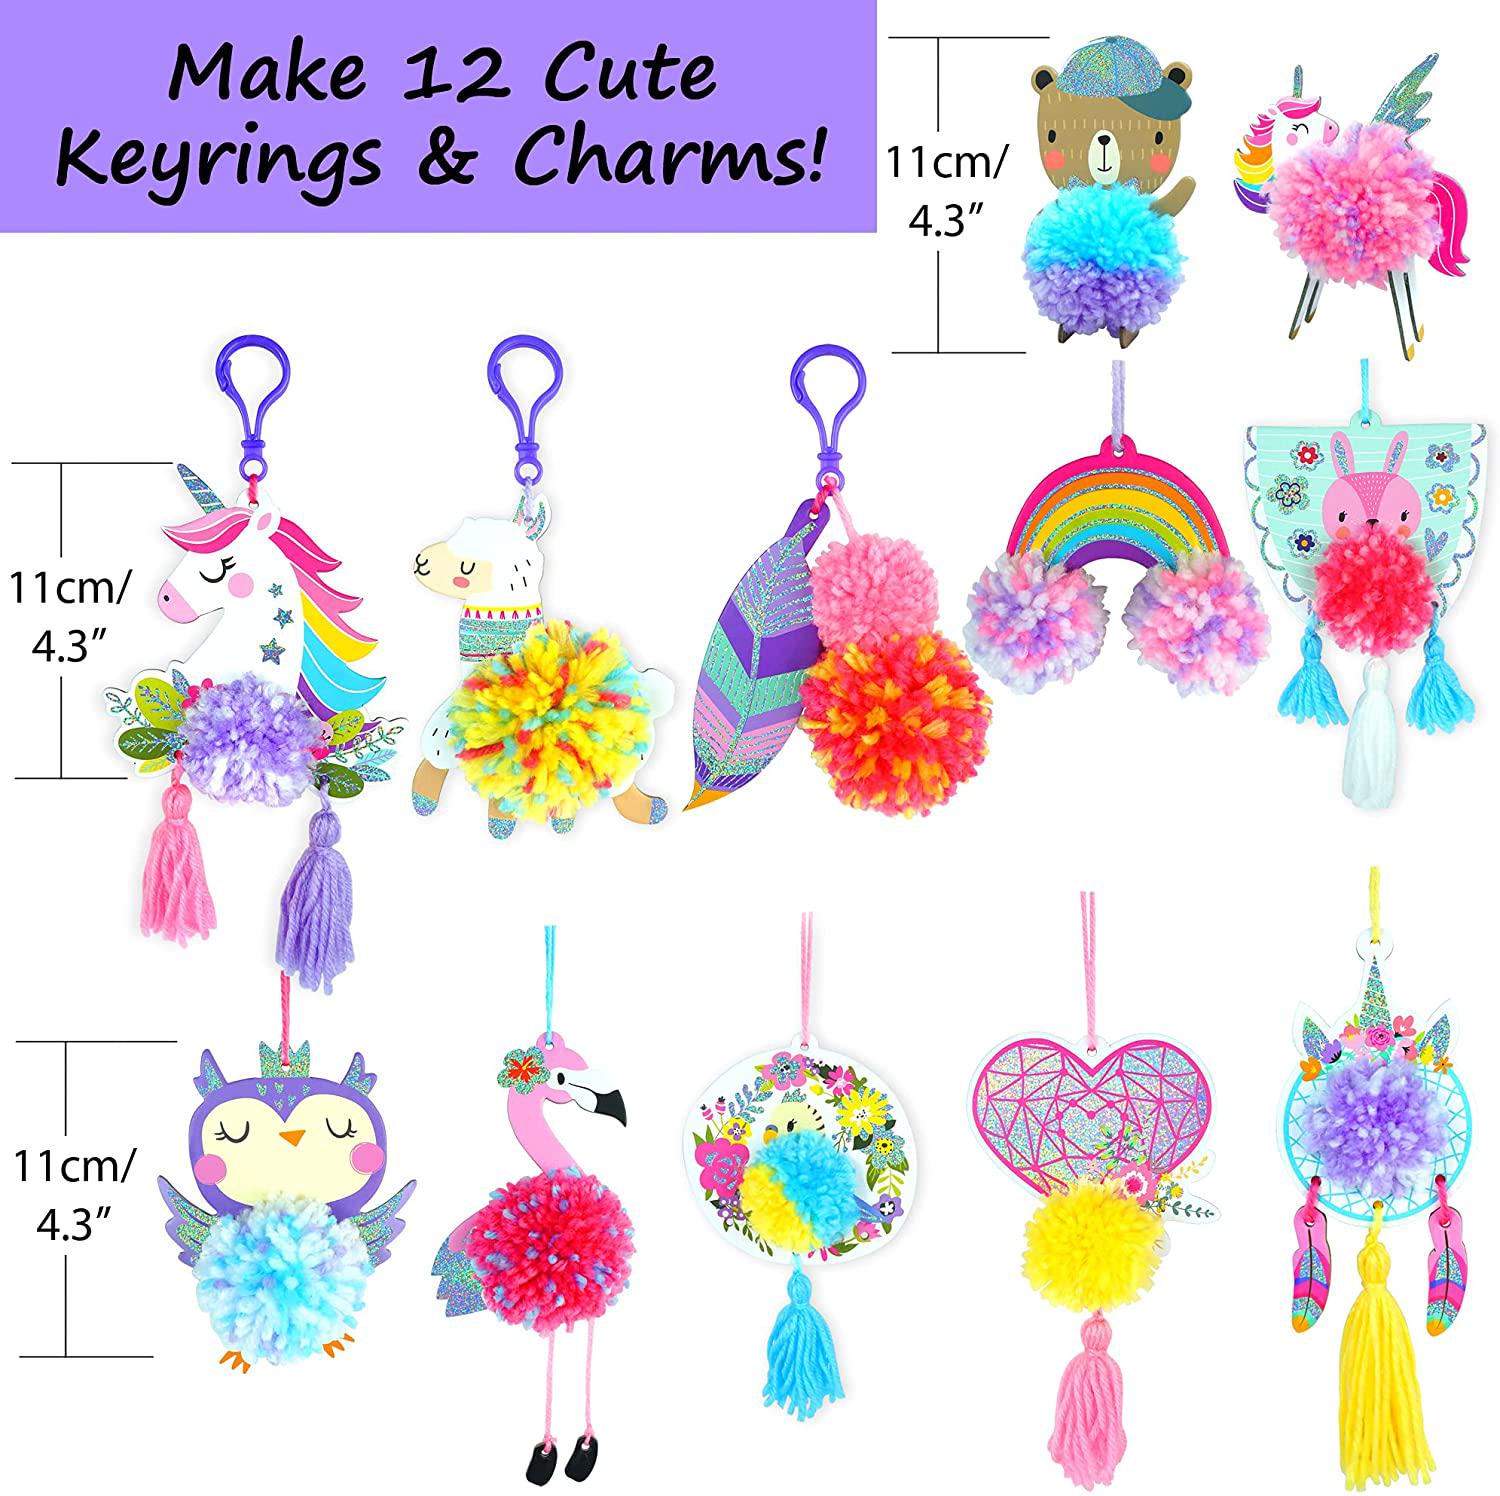 KRAFUN, KRAFUN Unicorn Pom Pom Character Animal Arts and Crafts Kit, Includes 12 Mini Pom Pets Keyrings and Charms, Instructions, Tools and Materials, Beginner Plush Project for Boys and Girls